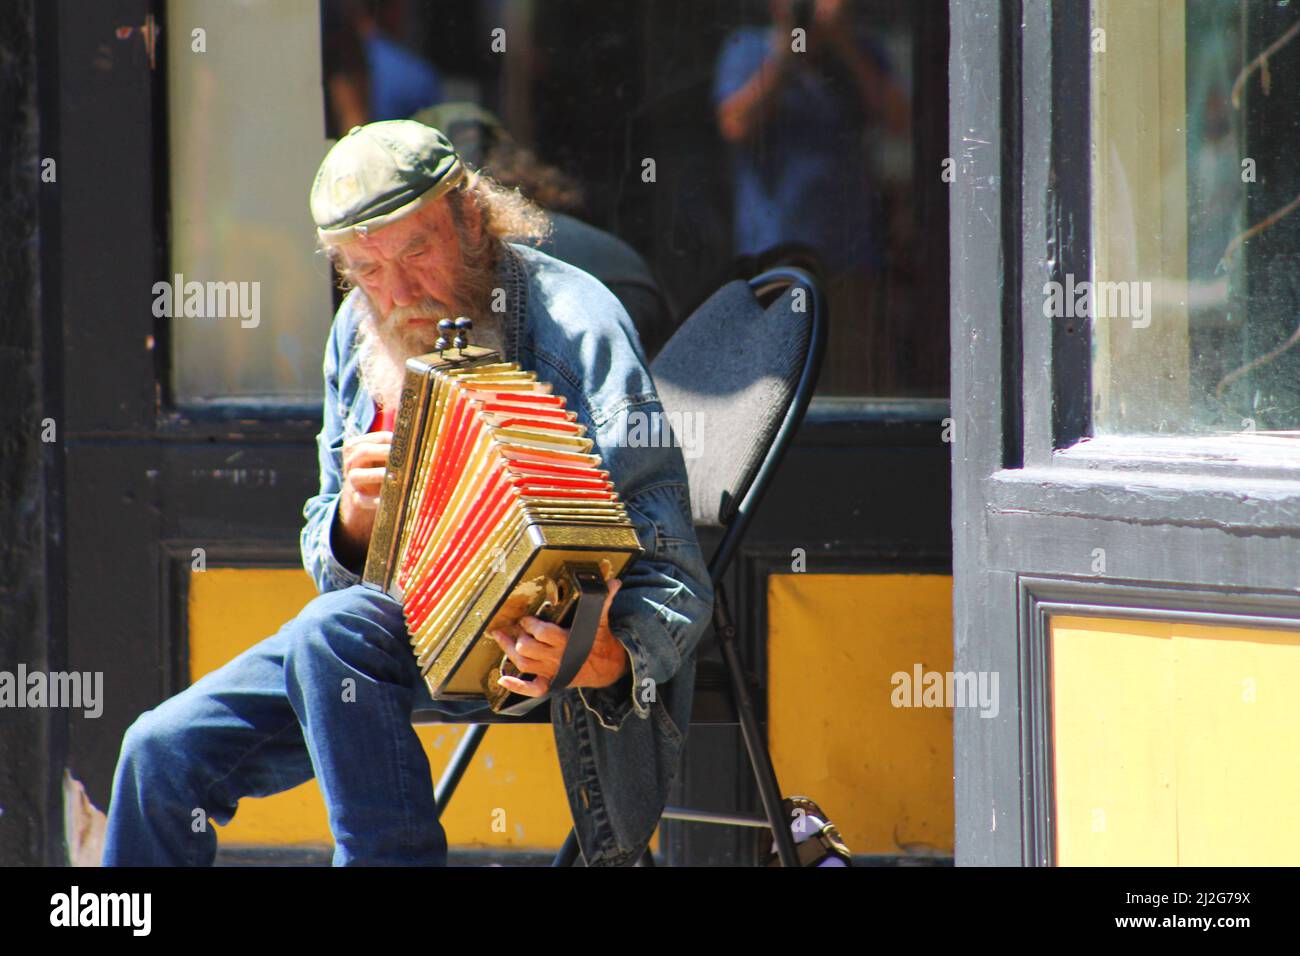 A busker playing an accordian in a doorway, Water Street, St. John's, NL. Stock Photo